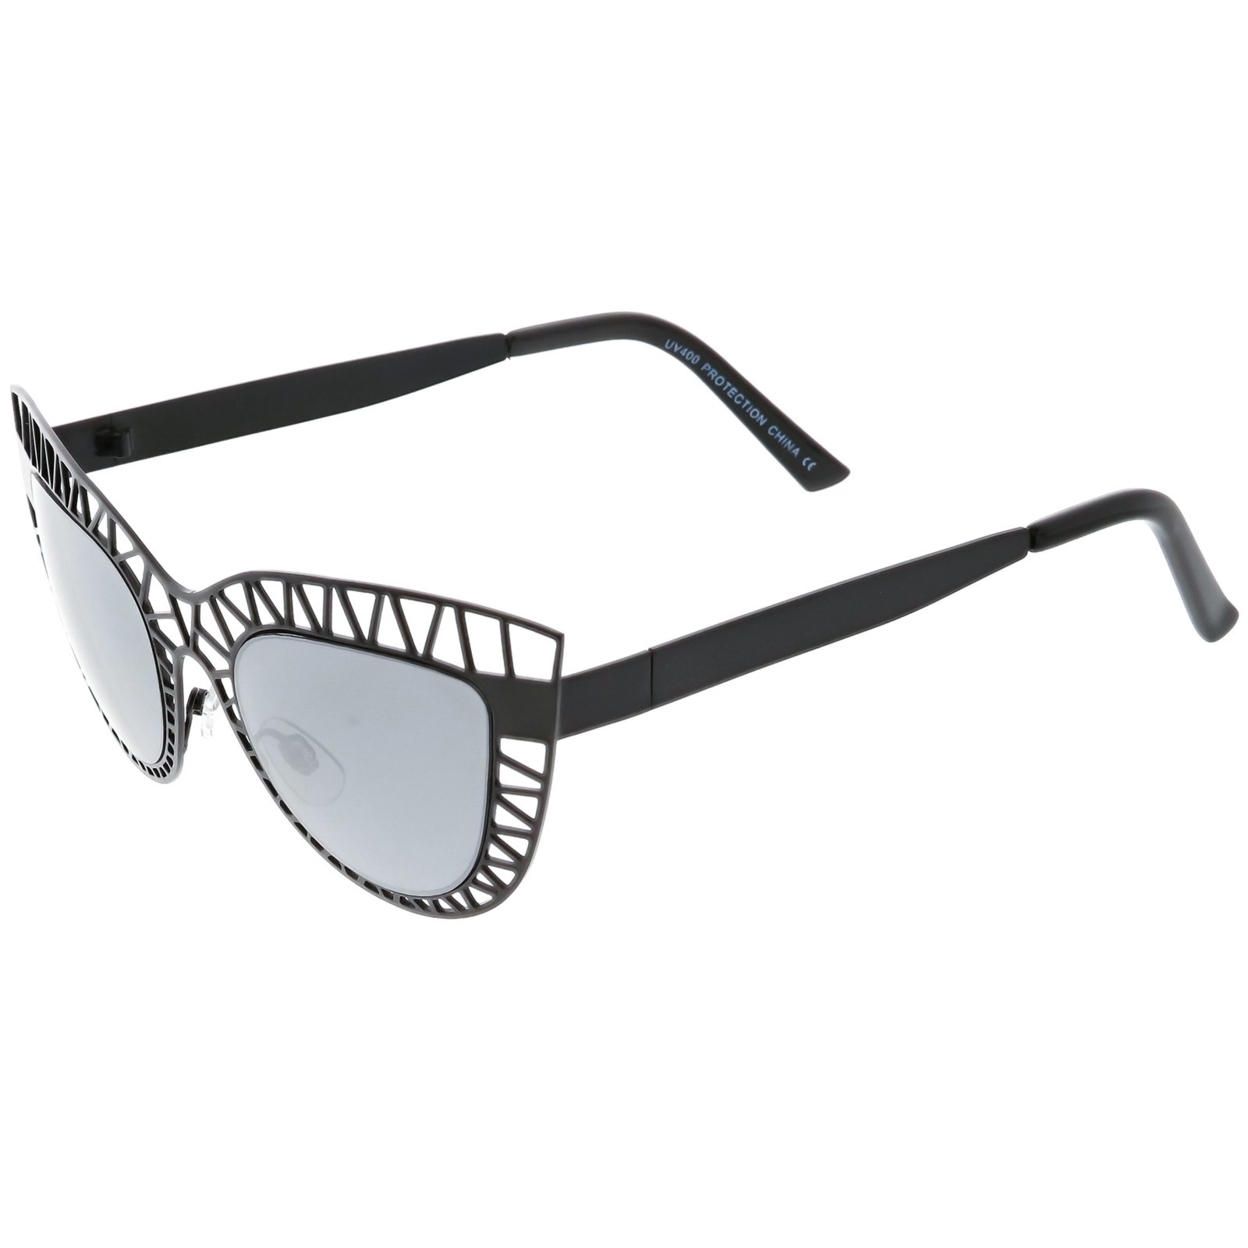 Unique Laser Cut Out Cat Eye Sunglasses With Color Mirrored Lens 48mm - Matte Silver / Magenta Mirror